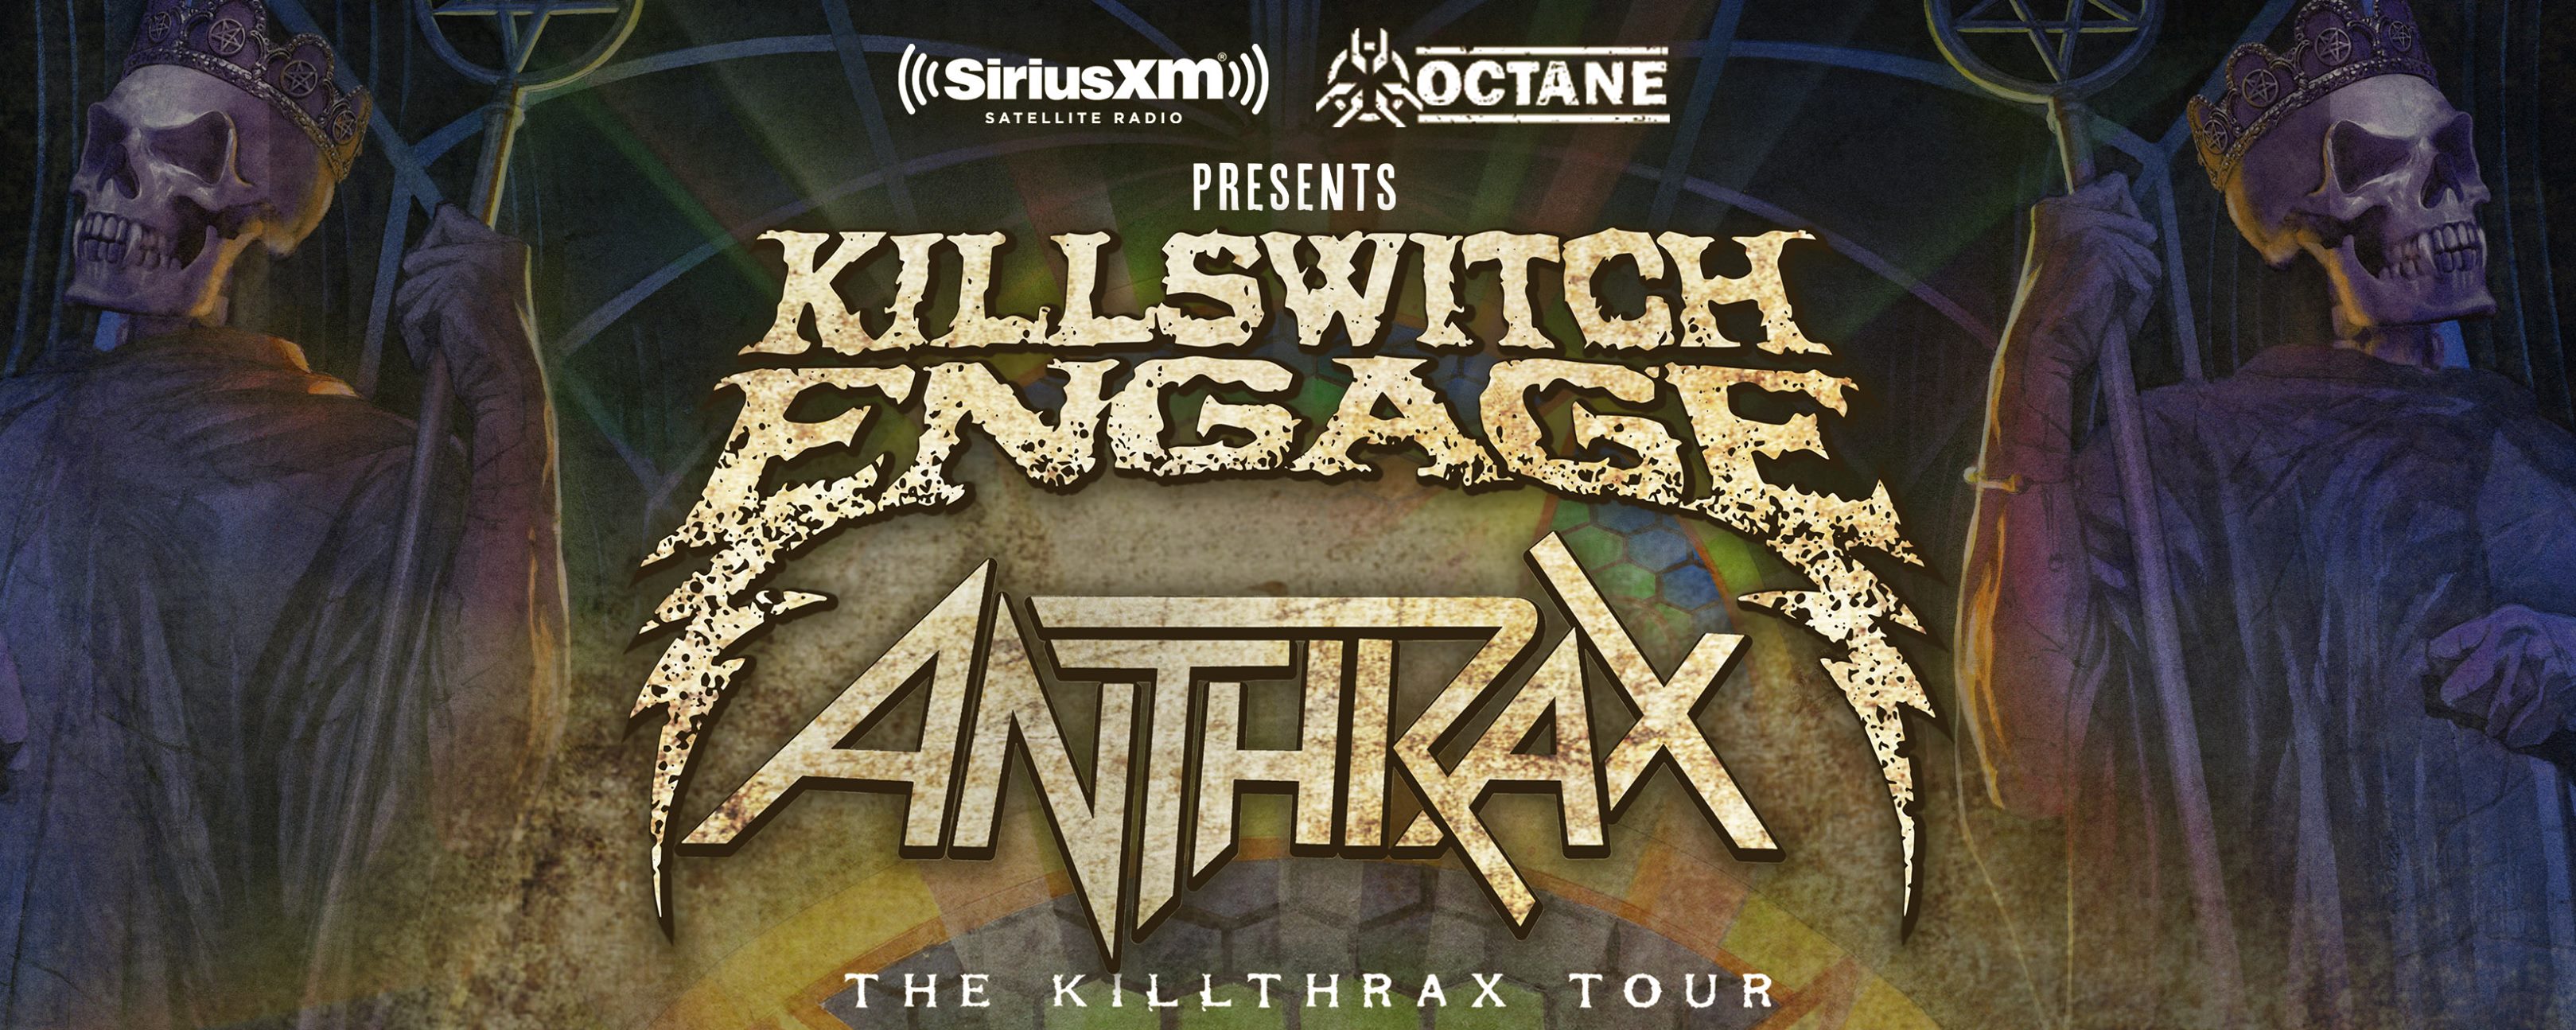 The KILLTHRAX Tour Makes Stop At The Fillmore Silver Spring